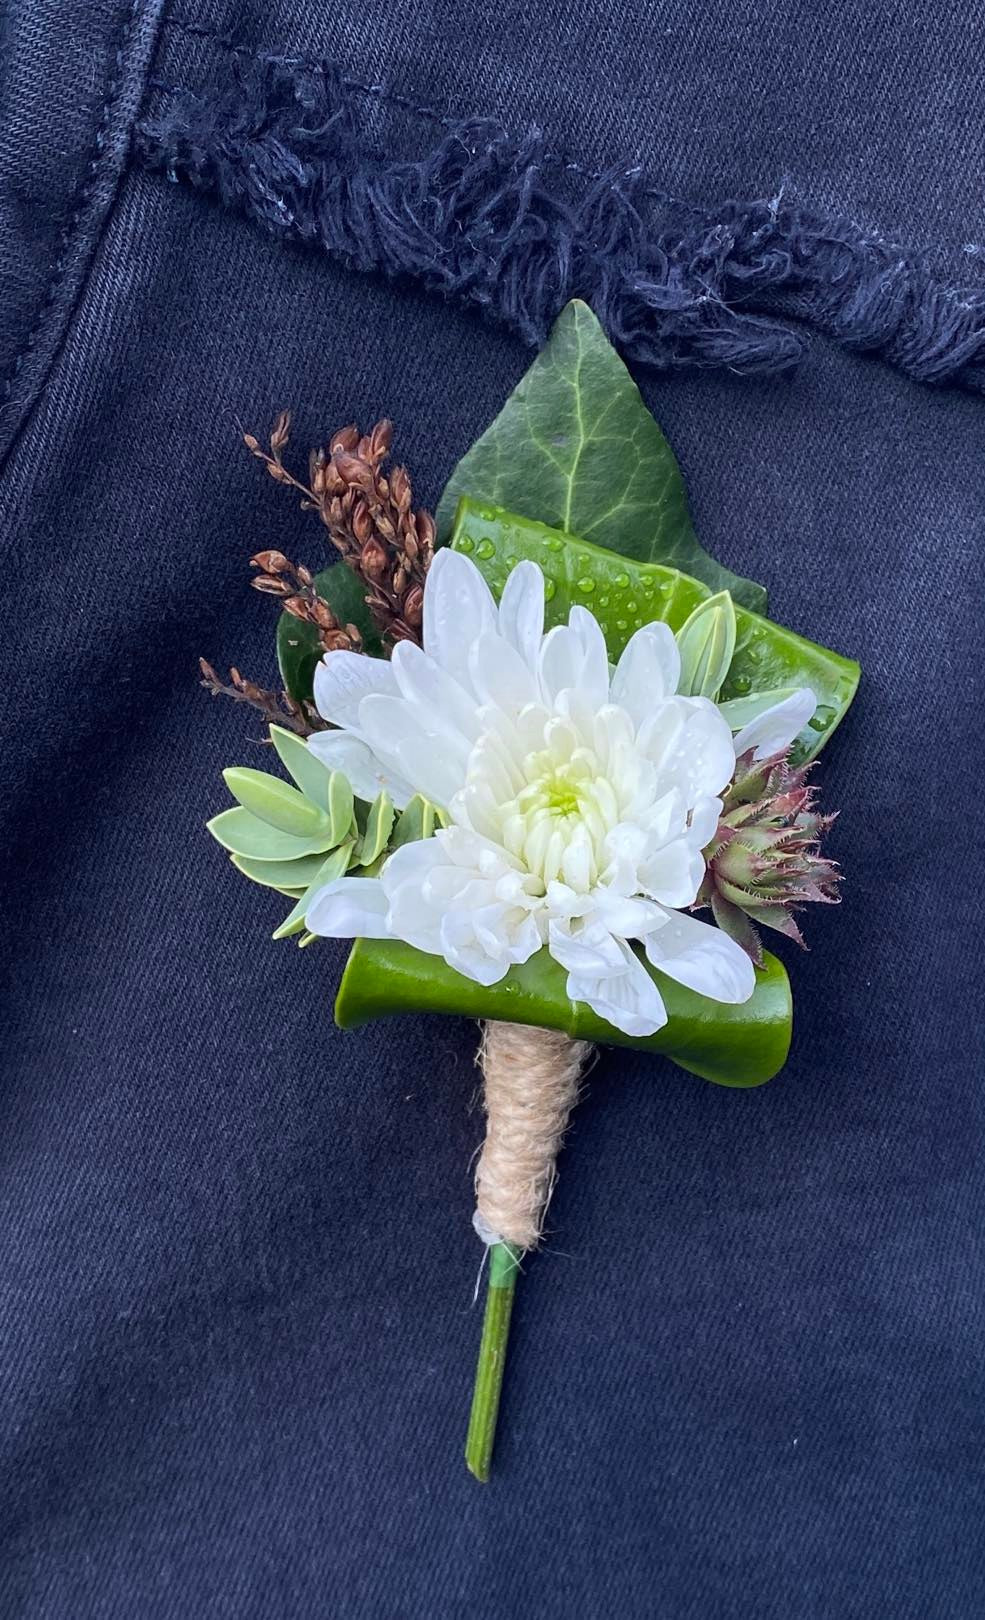 A Buttonhole with a single flower and interesting foliage with ribbon around the stems